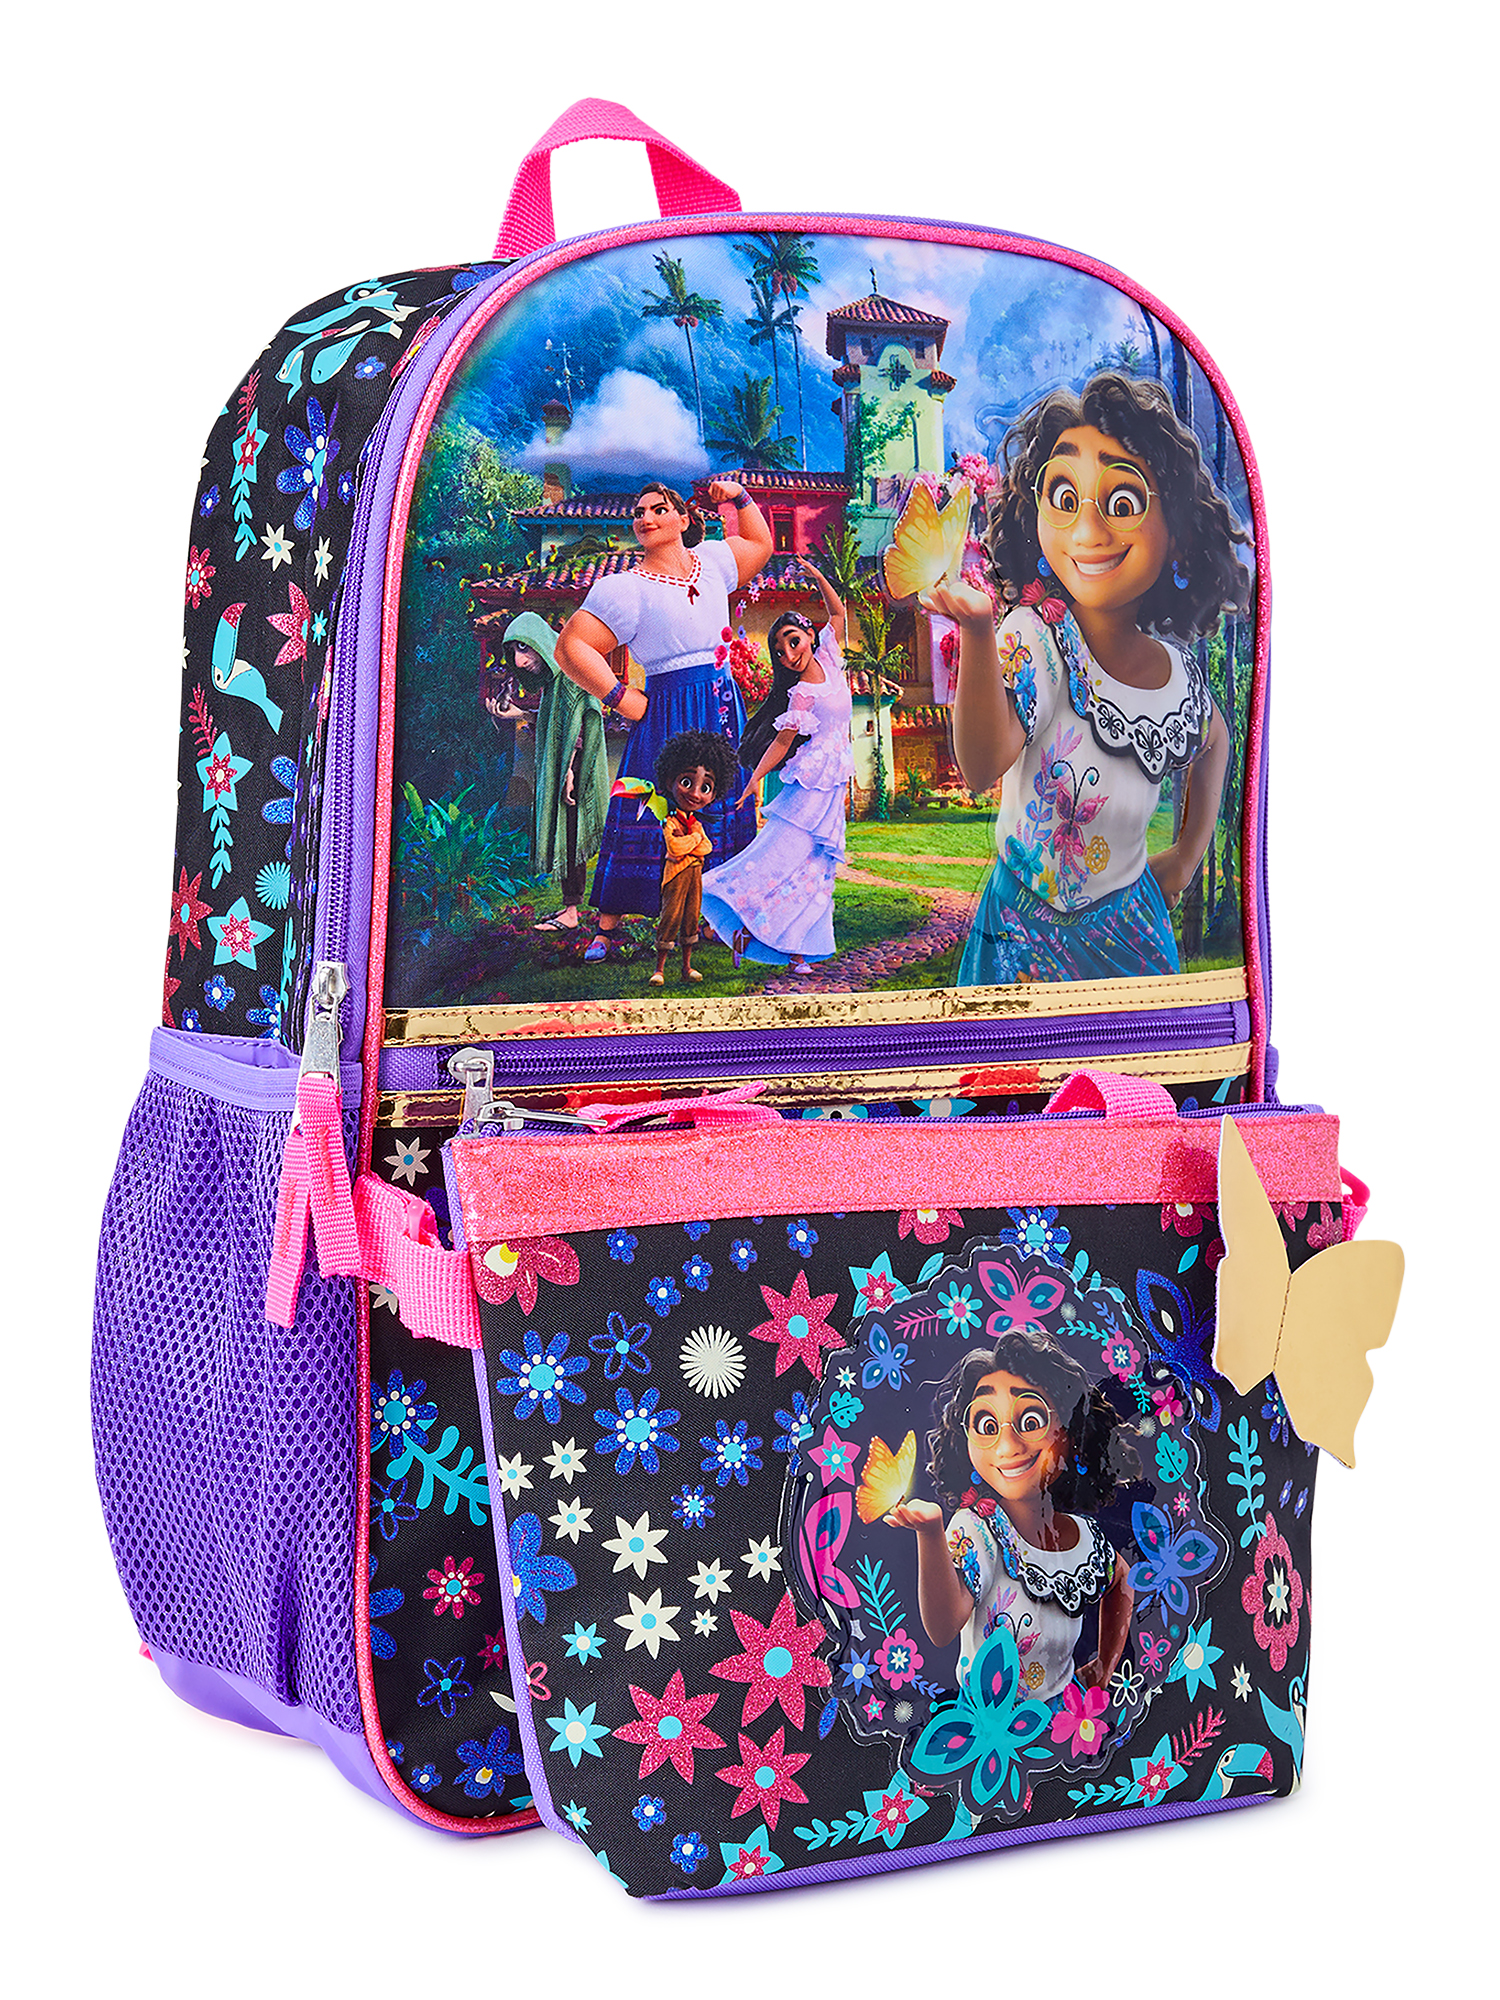 Disney Encanto Magic Family Girls 17" Laptop Backpack 2-Piece Set with Lunch Tote Bag, Purple Pink - image 1 of 5